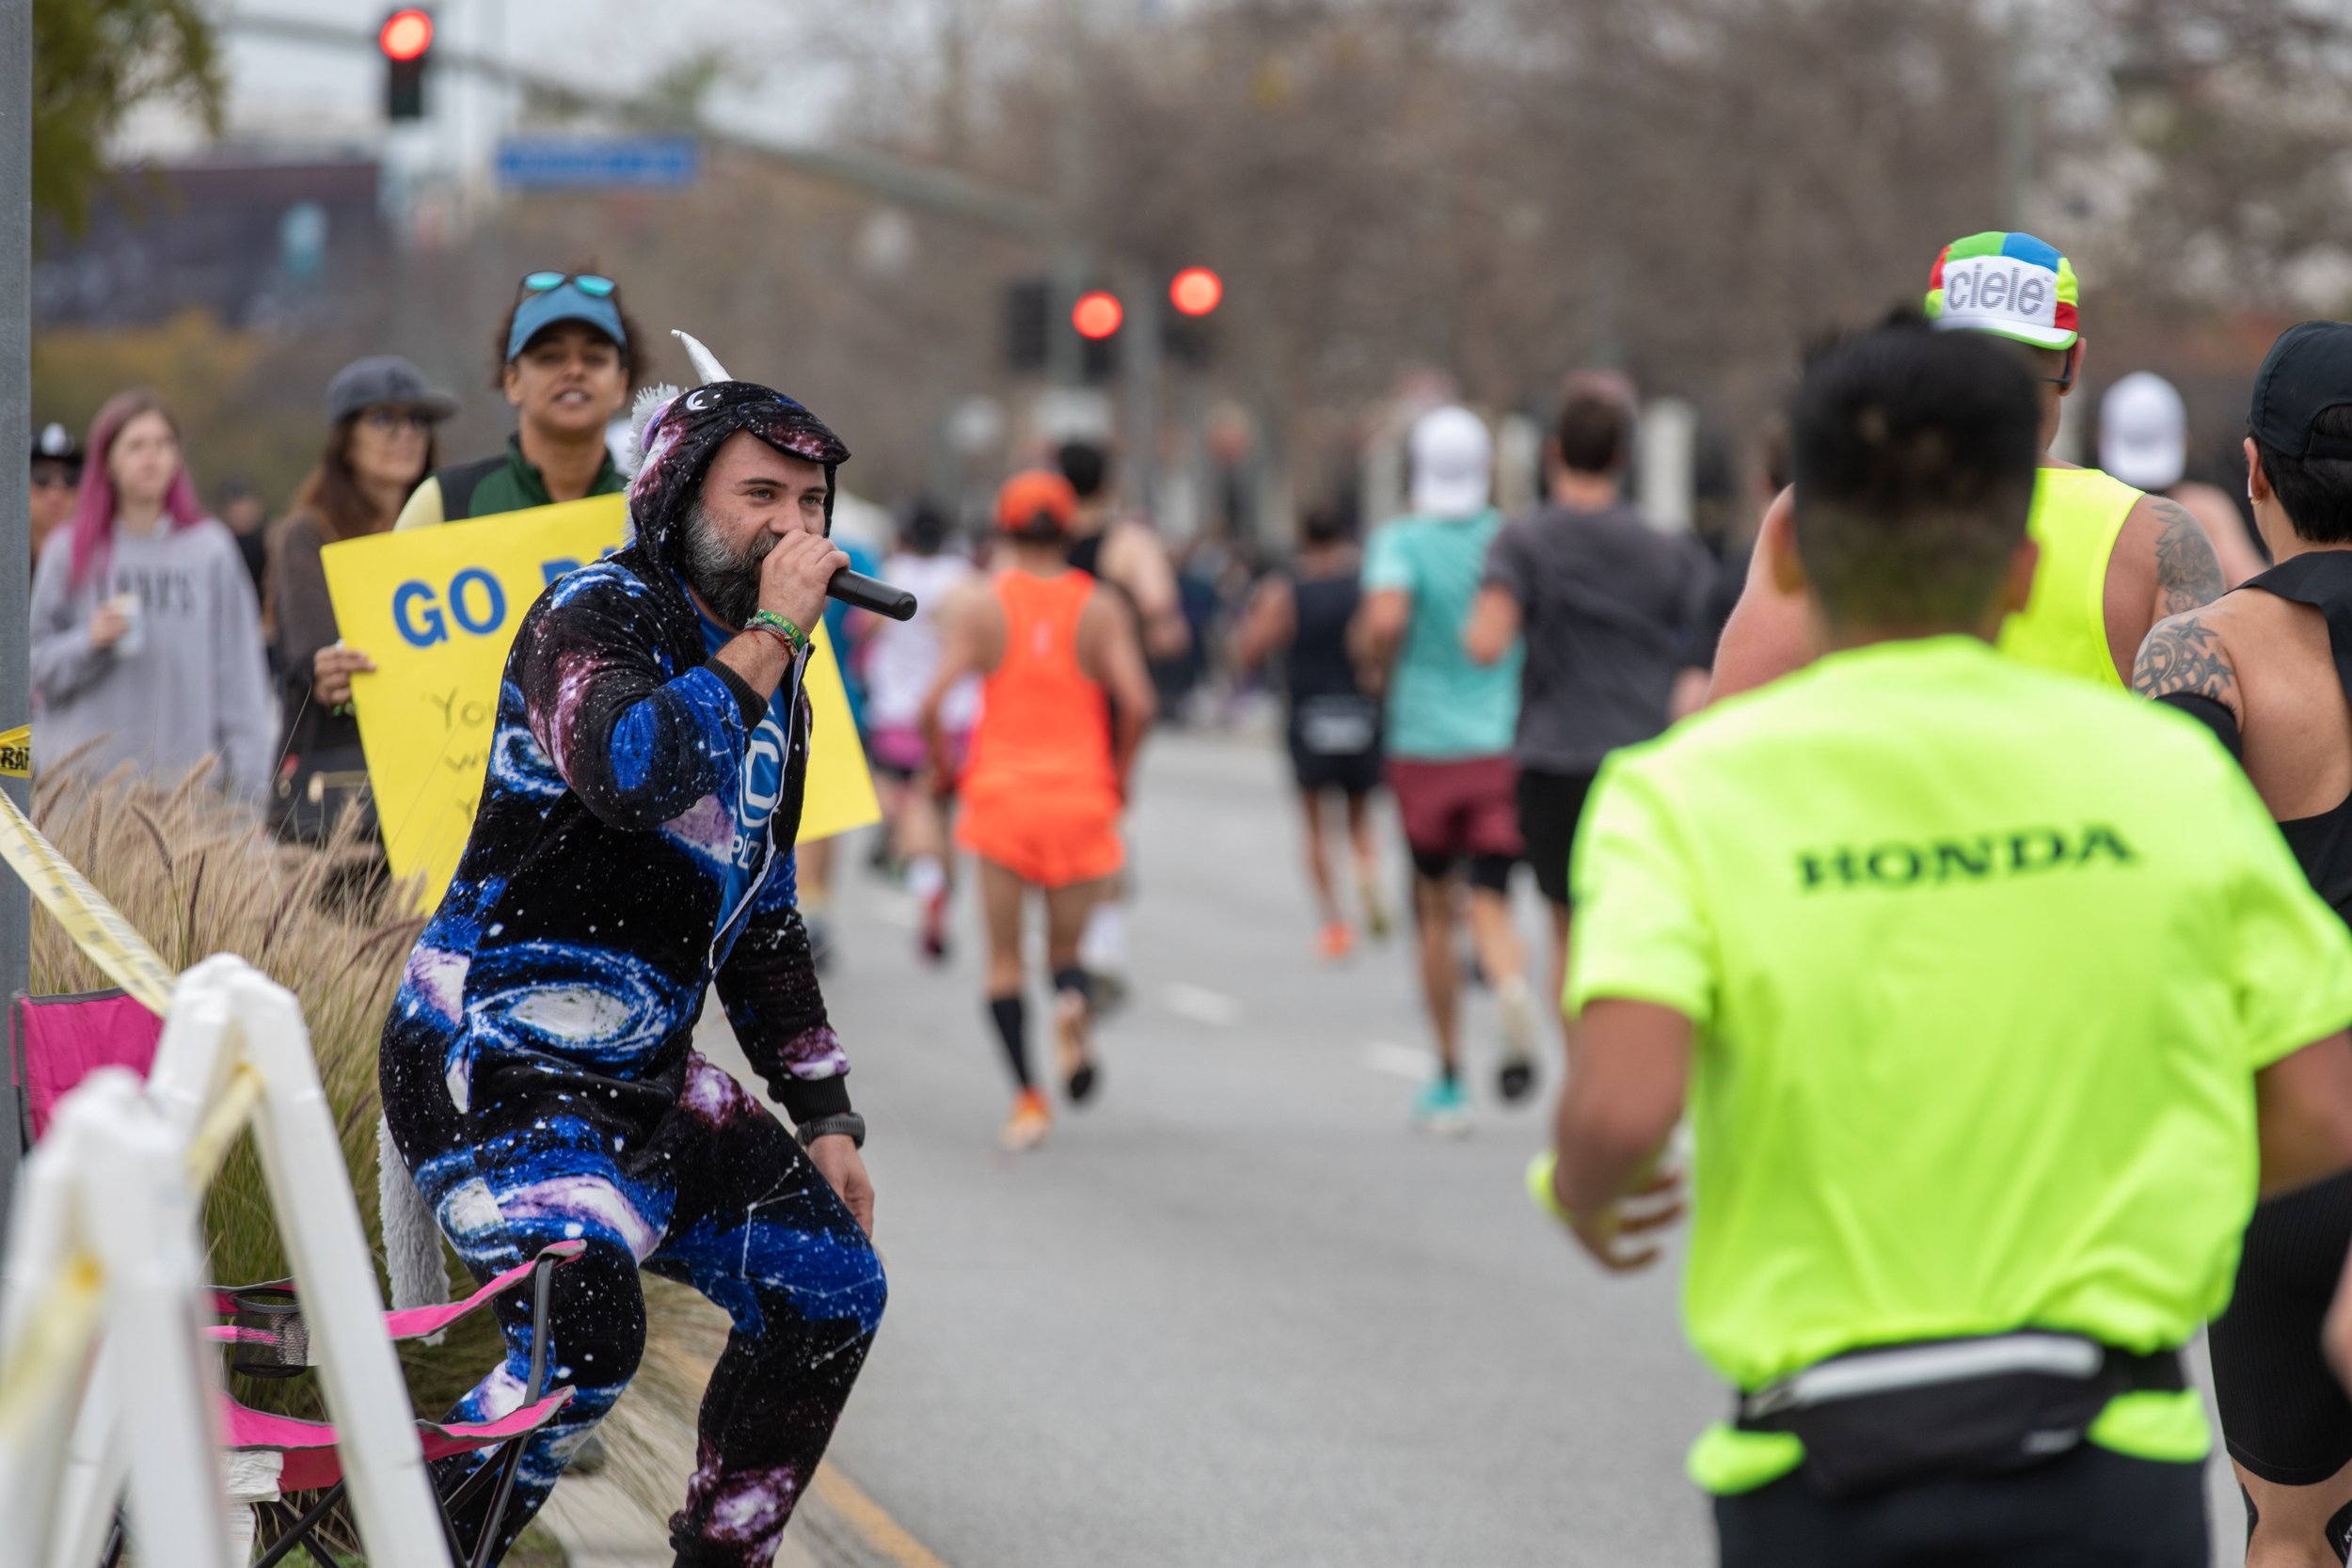  Javier García on a unicorn outfit and a microphone encouraging the runners heading West on Santa Monica Blvd. with cheers and funny comments during the L.A. Marathon 2023. García belongs to the Cruda running club, but they joined forces with Valley 